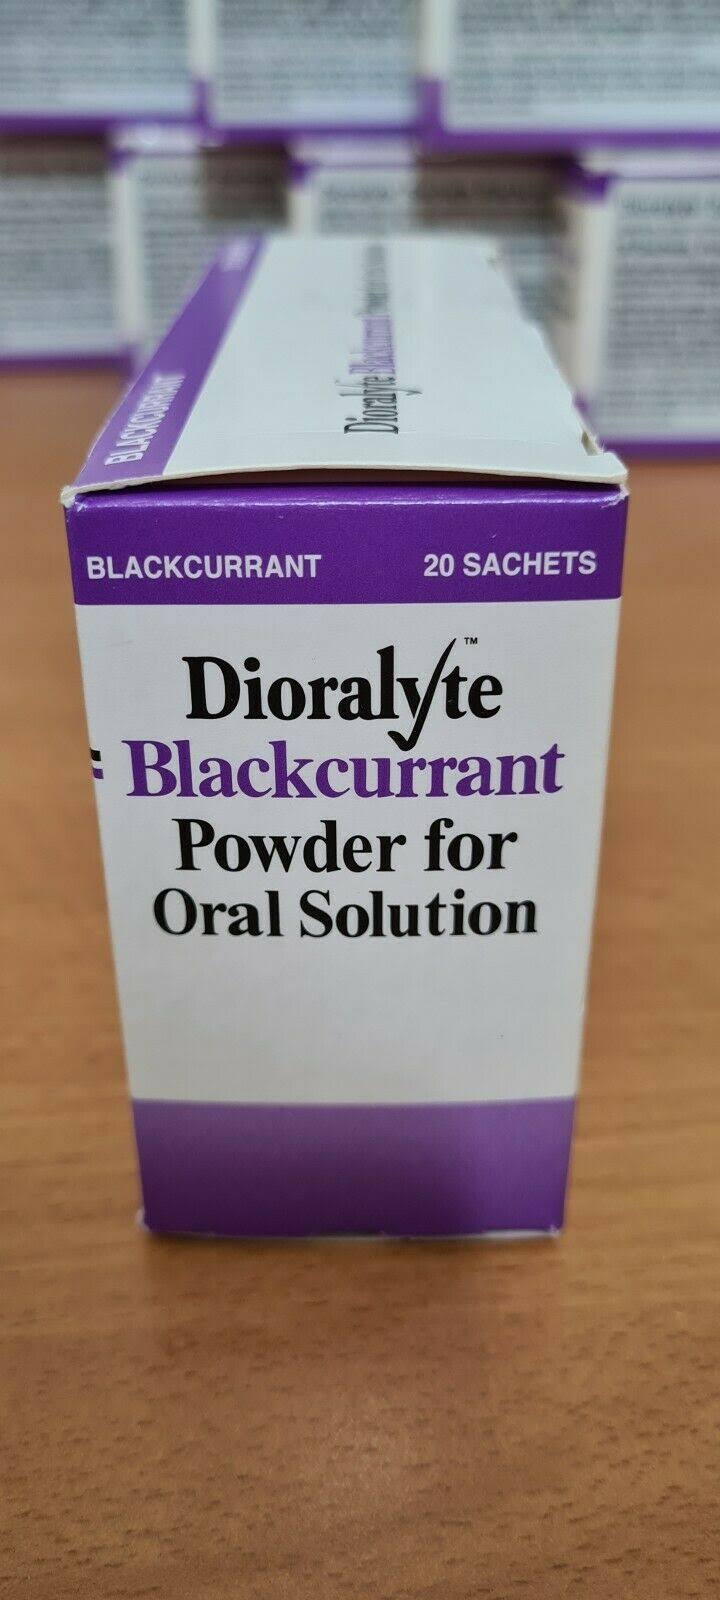 Dioralyte Blackcurrant Sachets for Oral Solution - Dioralyte Blackcurrant Sachets